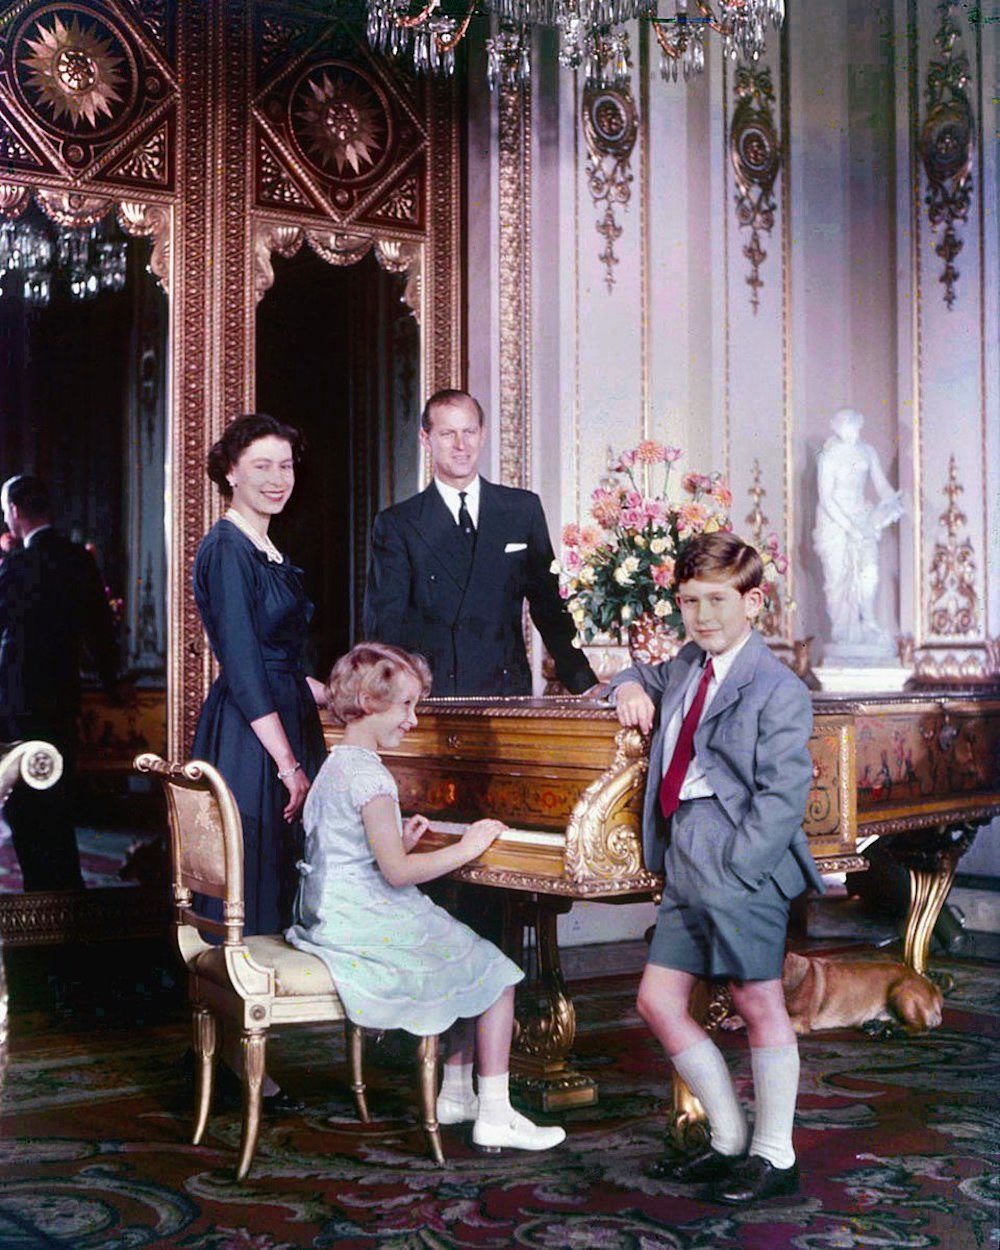 Prince Charles with his parents and sister Princess Anne, October 1957. Photo Credit: © Library and Archives Canada, e010949328 / Bibliothèque et Archives Canada, e010949328 via Wikimedia Commons.